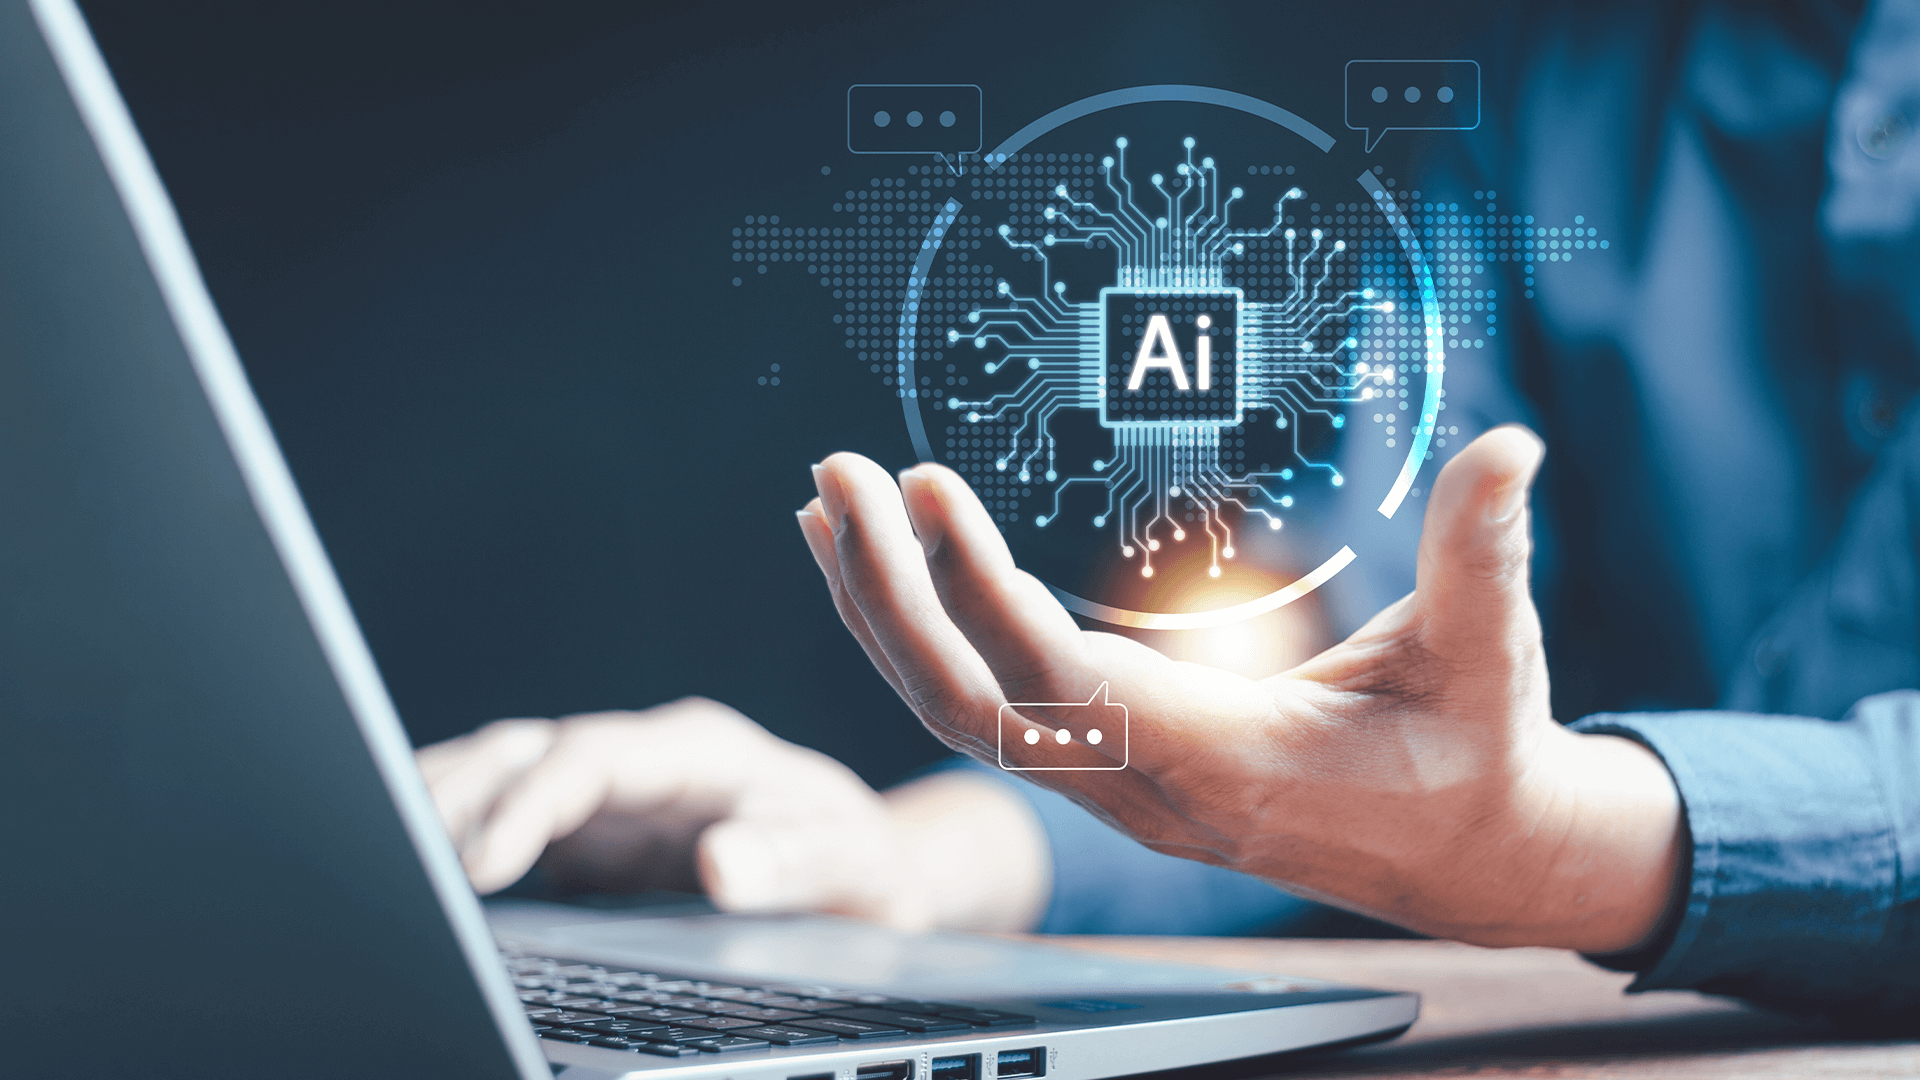 The importance of the AI system is symbolized by an image of AI in a human hand.